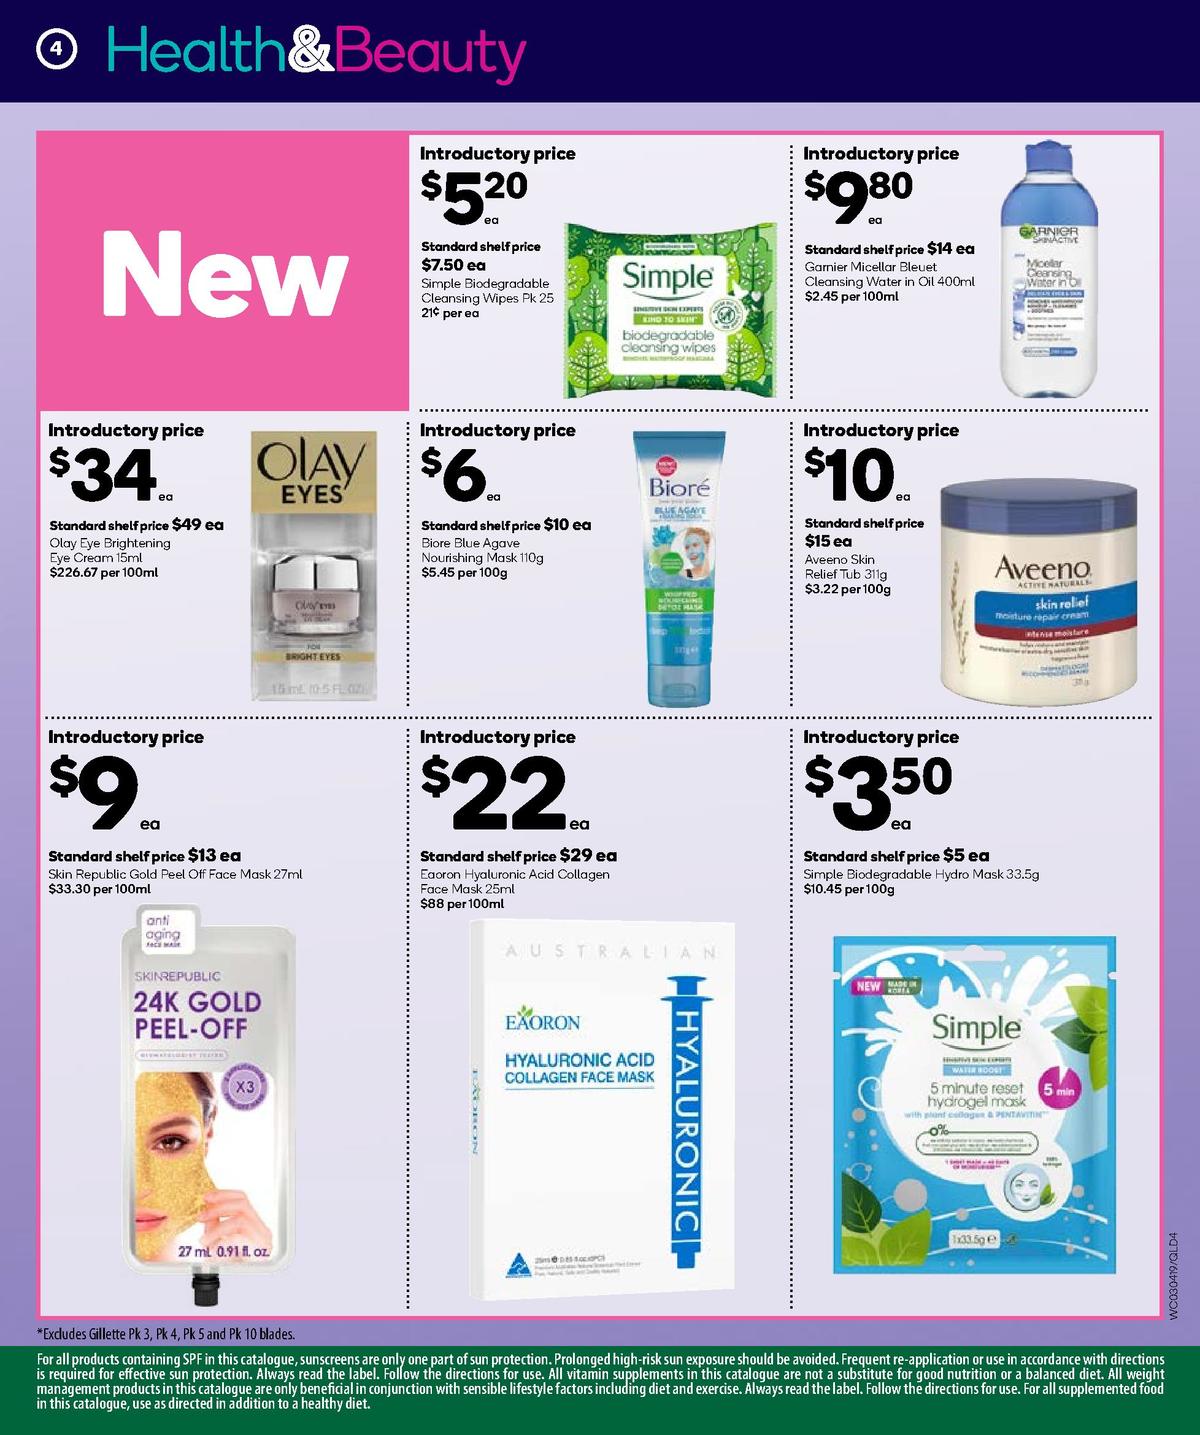 Woolworths Health & Beauty Catalogues from 3 April